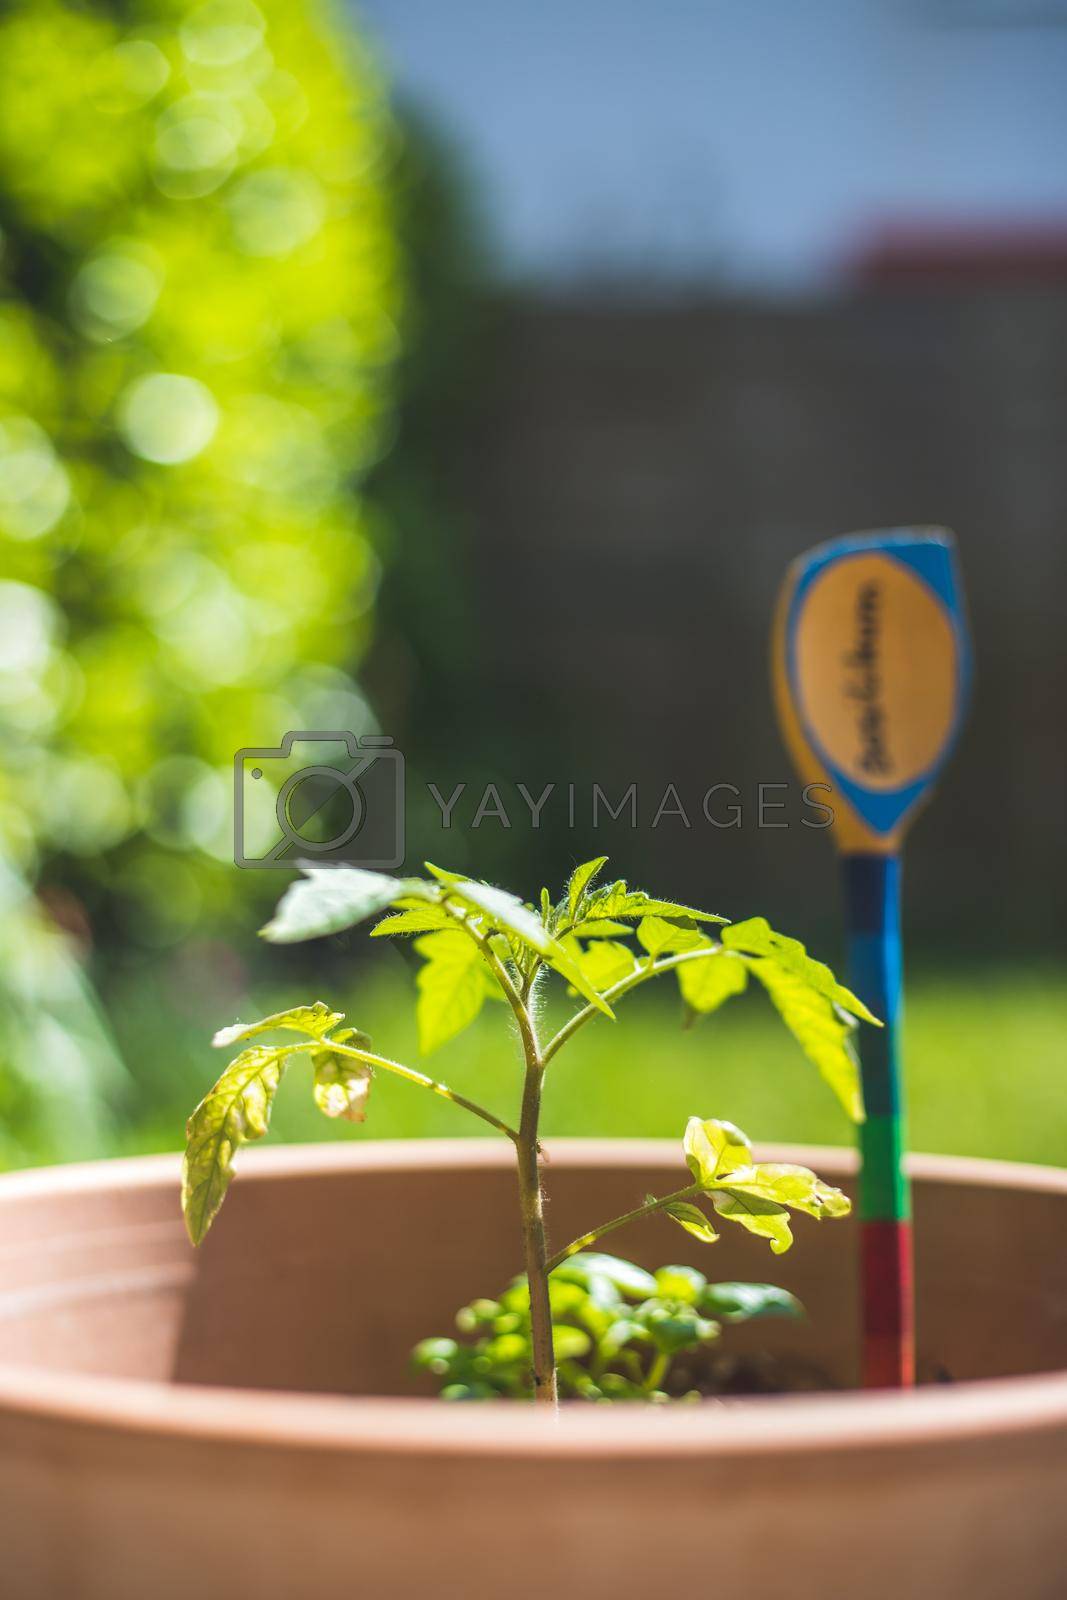 Royalty free image of Tomato planting in the raised bed: young plants are growing in the sunlight by Daxenbichler